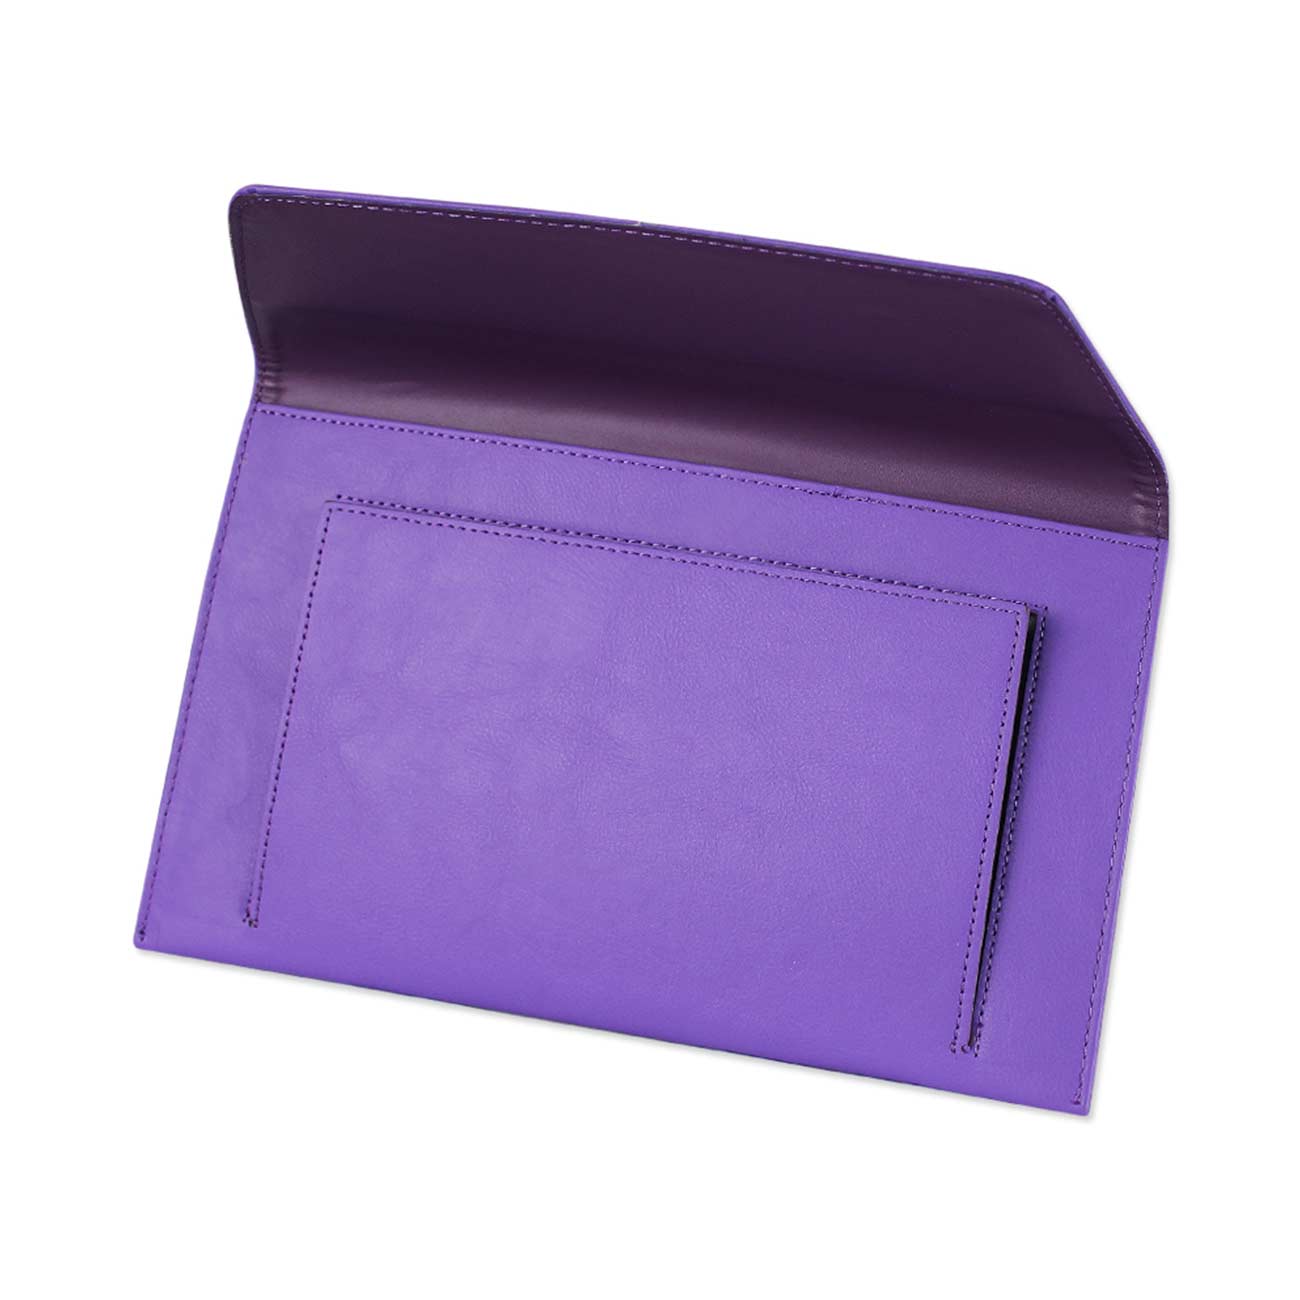 REIKO PREMIUM LEATHER CASE POUCH FOR 11.6INCHES IPADS AND TABLETS In PURPLE